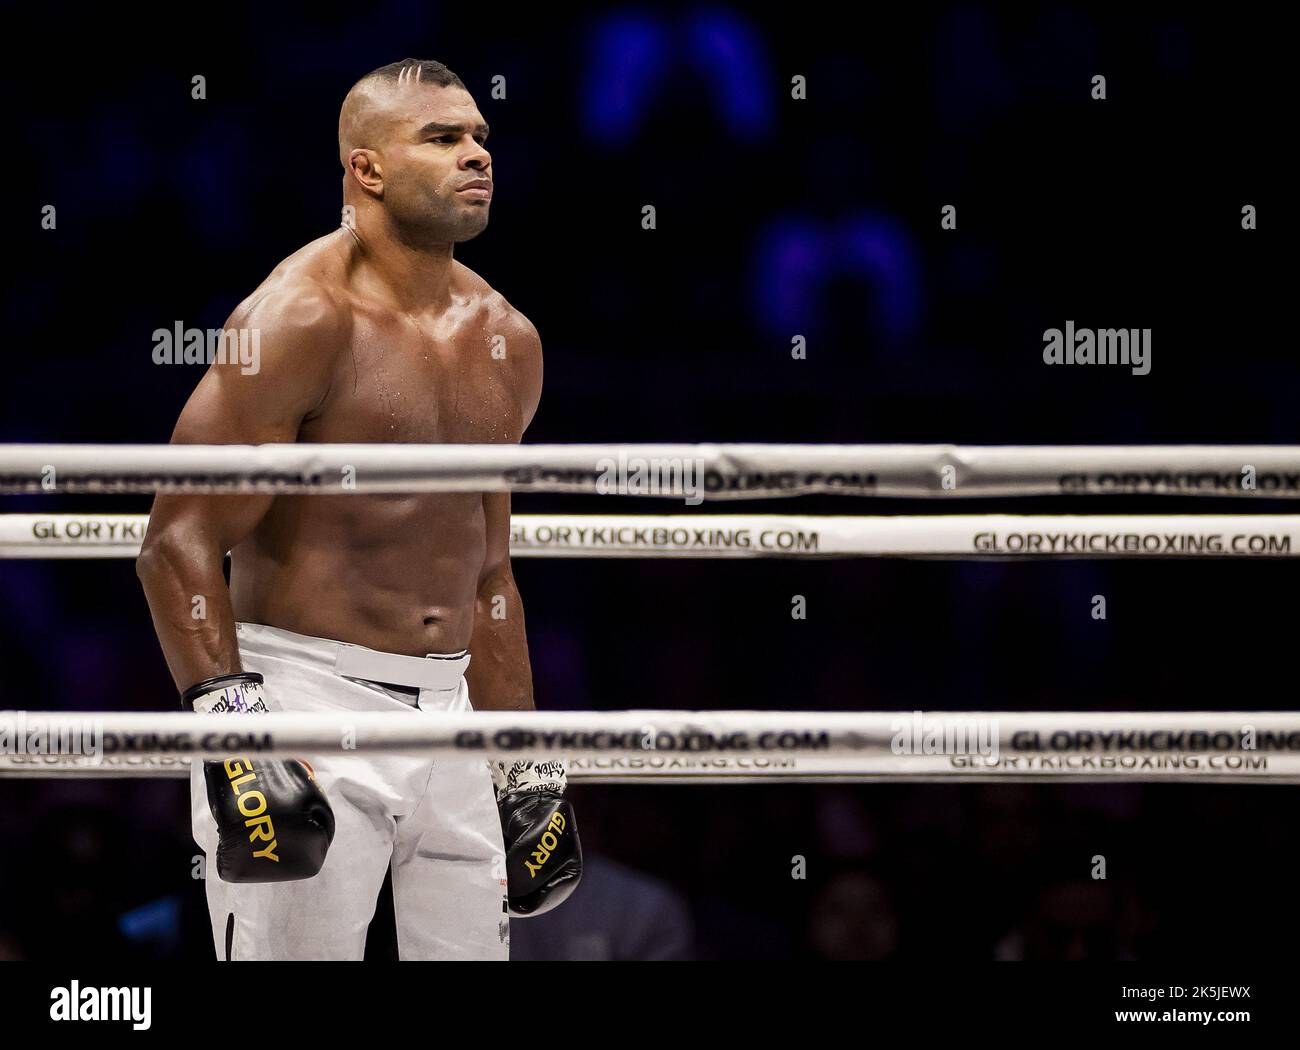 2022-10-08 23:19:52 ARNHEM - Kickboxer Alistair Overeem during his GLORY: Collision 4 fight against Badr Hari in Gelredome in Arnhem. ANP REMKO DE WAAL netherlands out - belgium out Stock Photo